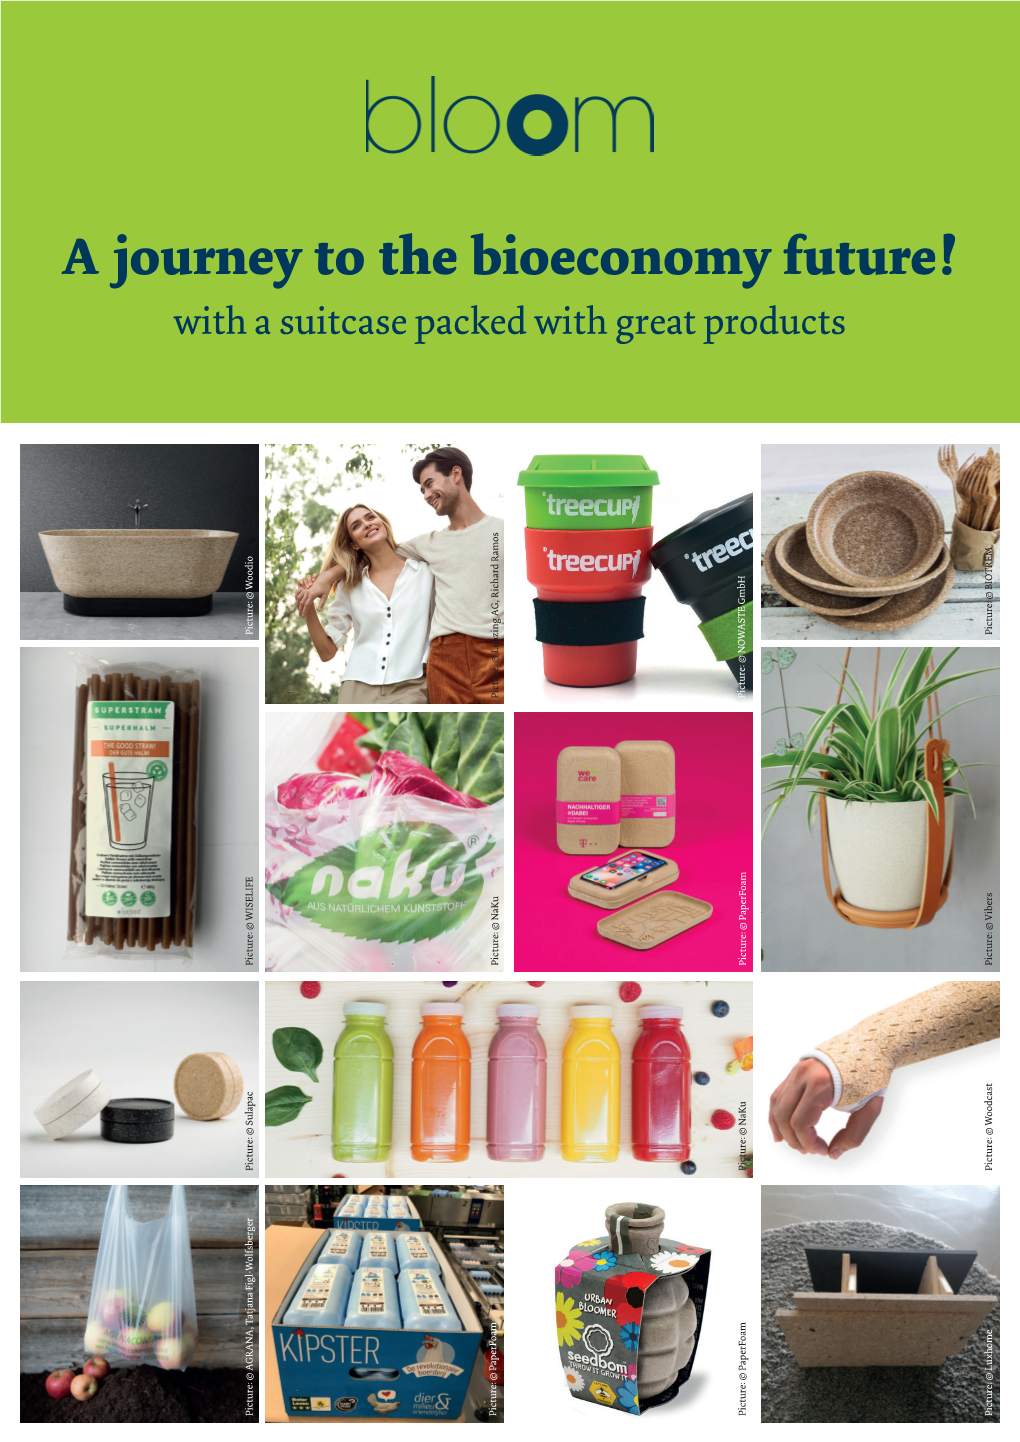 A Journey to the Bioeconomy Future!